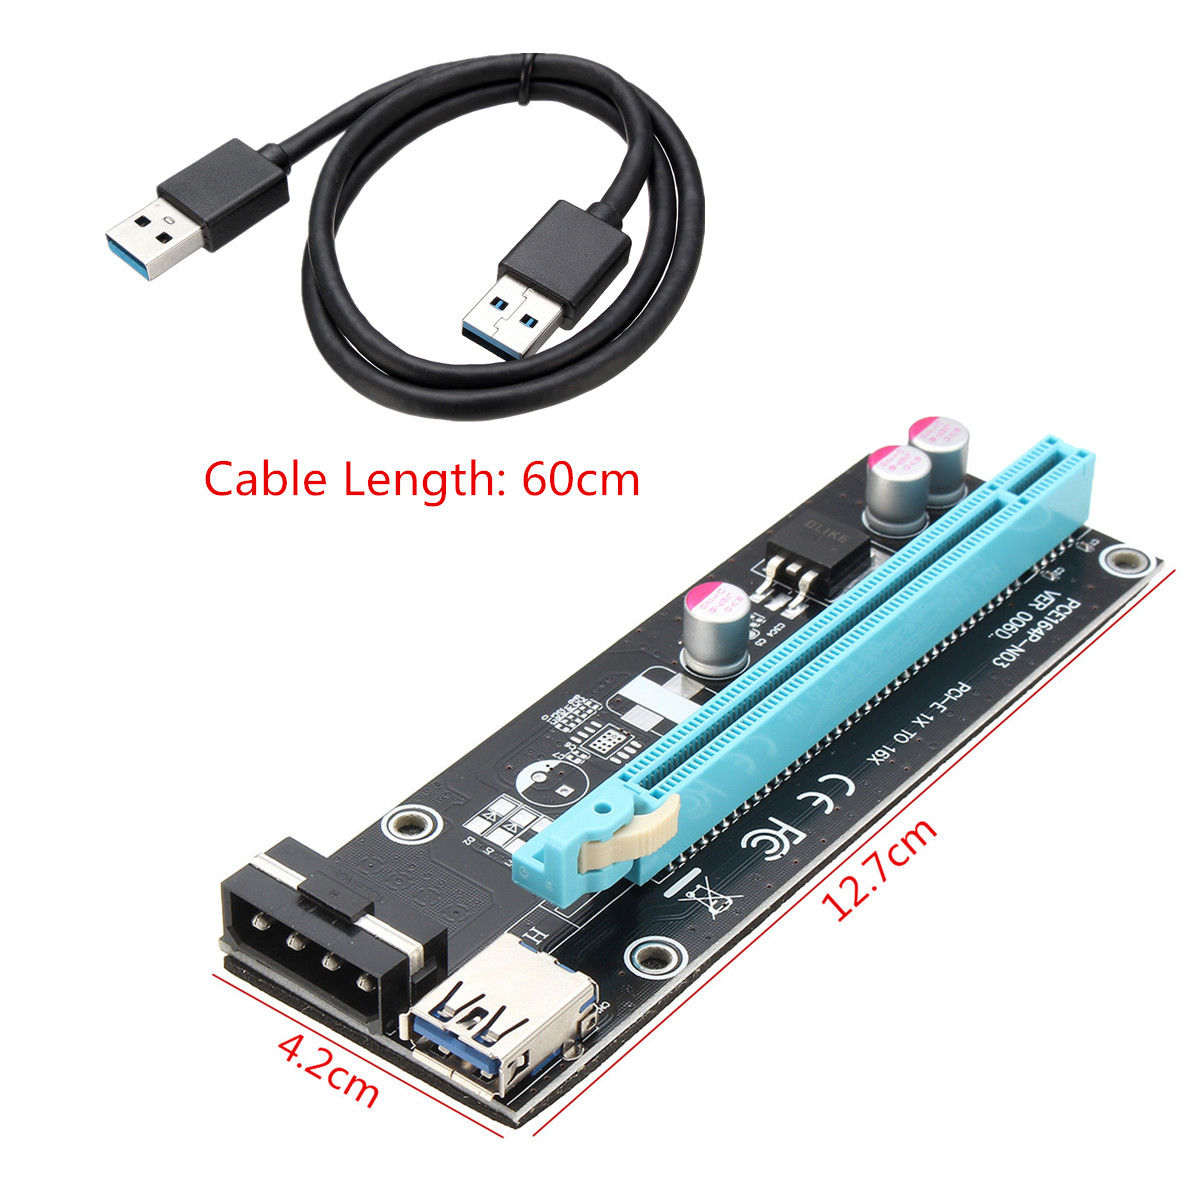 PCIE-Mining-Cable-1X-to-16X-Graphics-Card-Extension-Cable-PCI-E-Anti-burn-Design-USB30-External-Grap-1250533-5